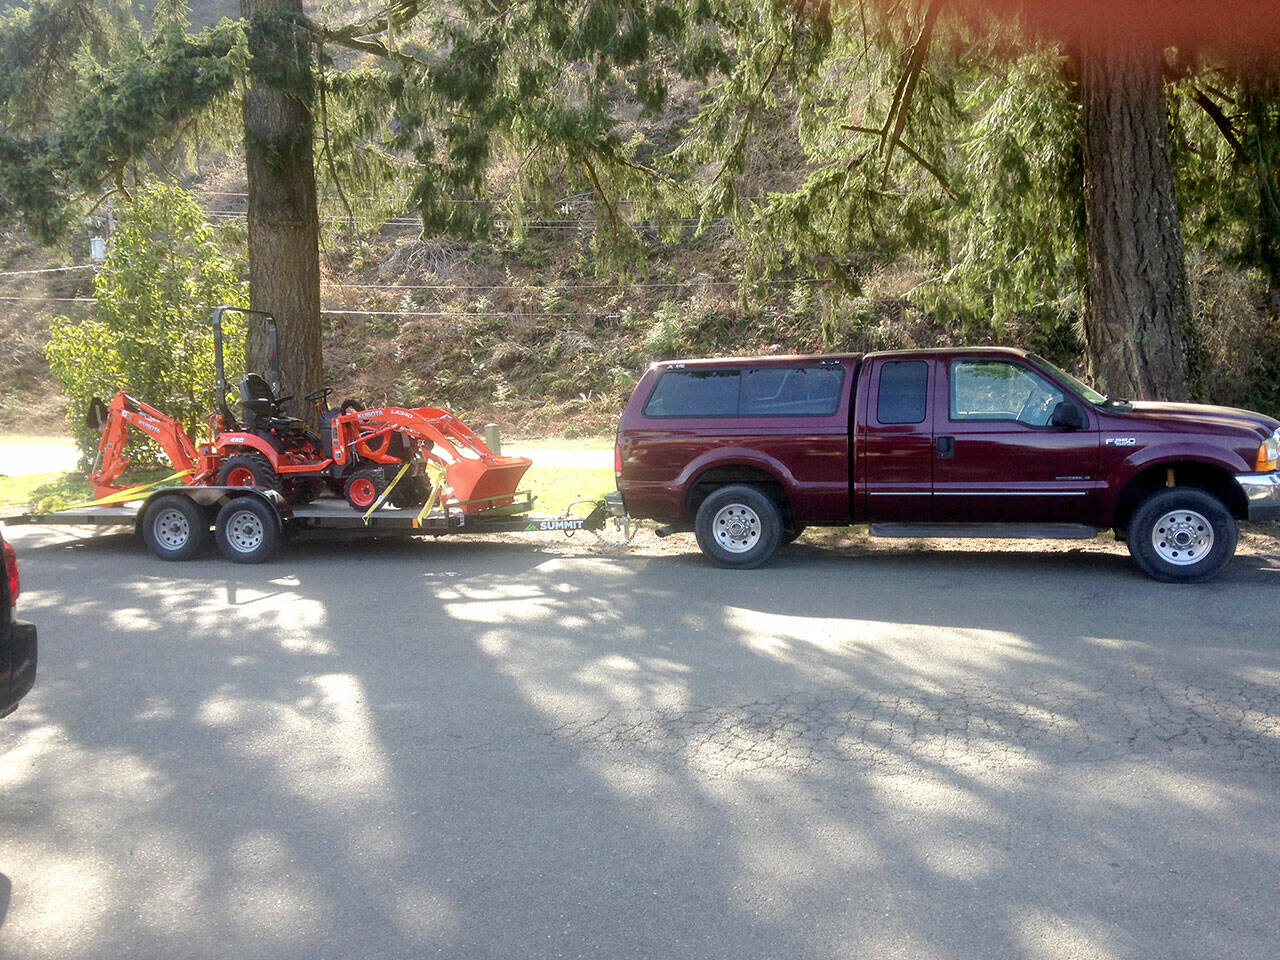 A truck, trailer and tractor were among items stolen from a Sekiu property. (Clallam County Sheriff’s Office)